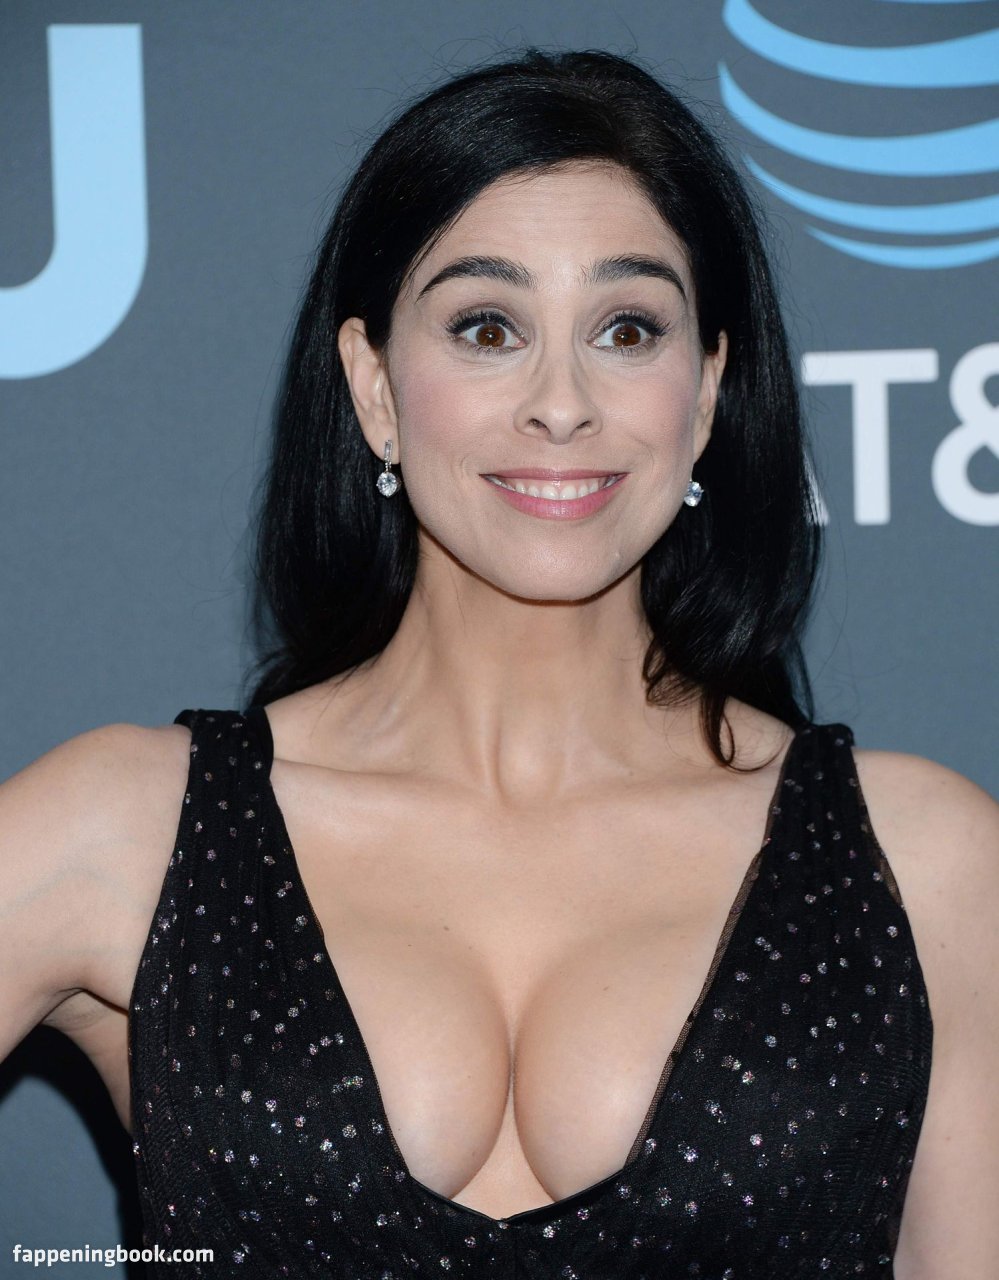 Busty Brunette Sarah Silverman Showing Her Main Assets in 